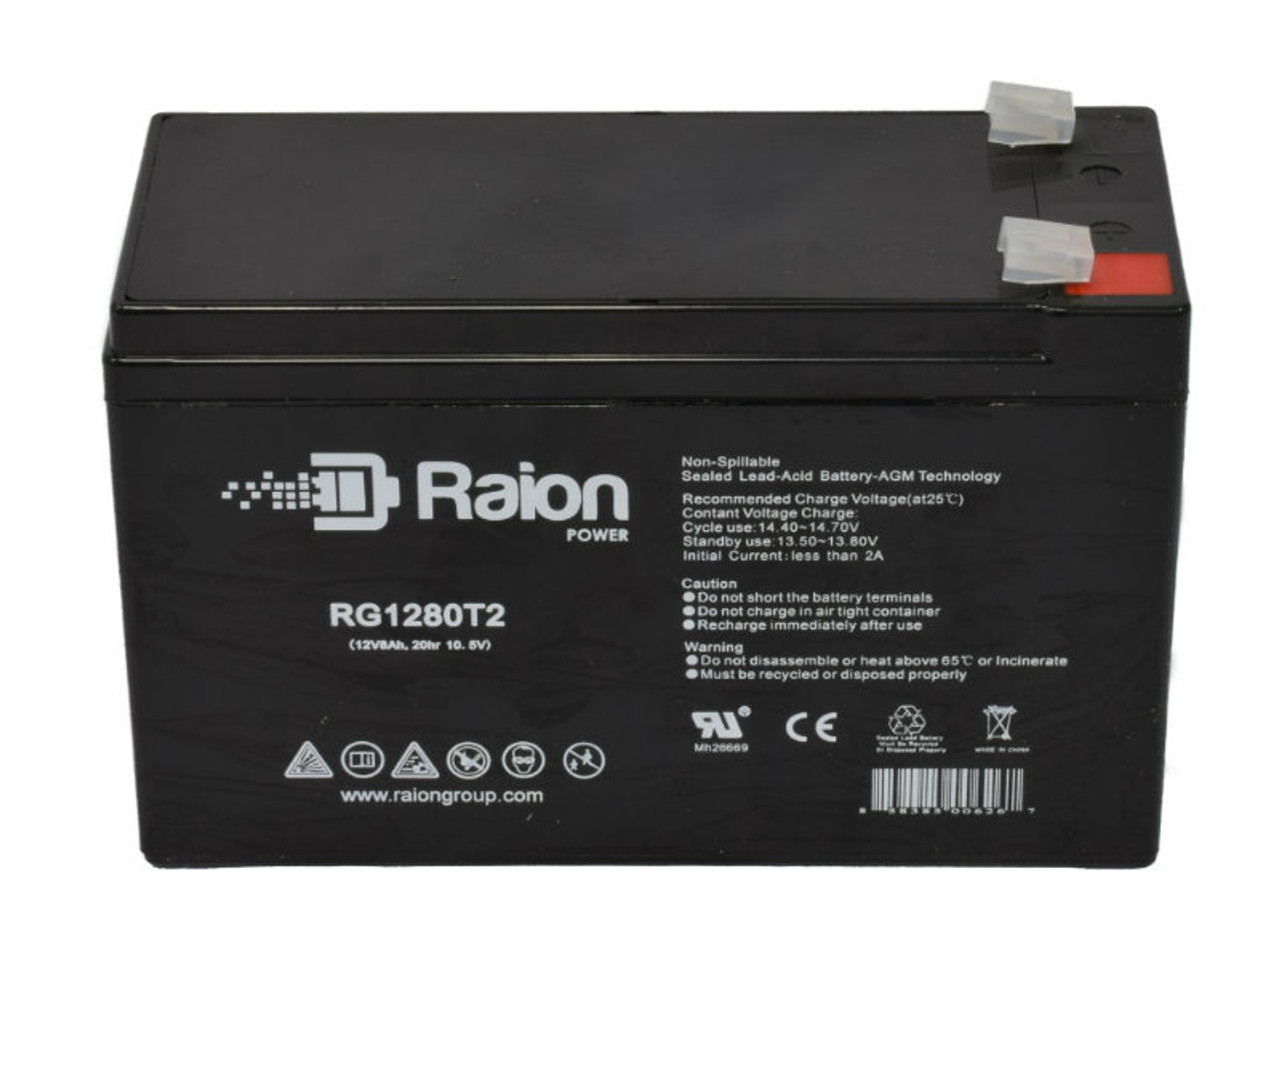 Raion Power RG1280T1 Replacement SLA Battery for Universal UB1280